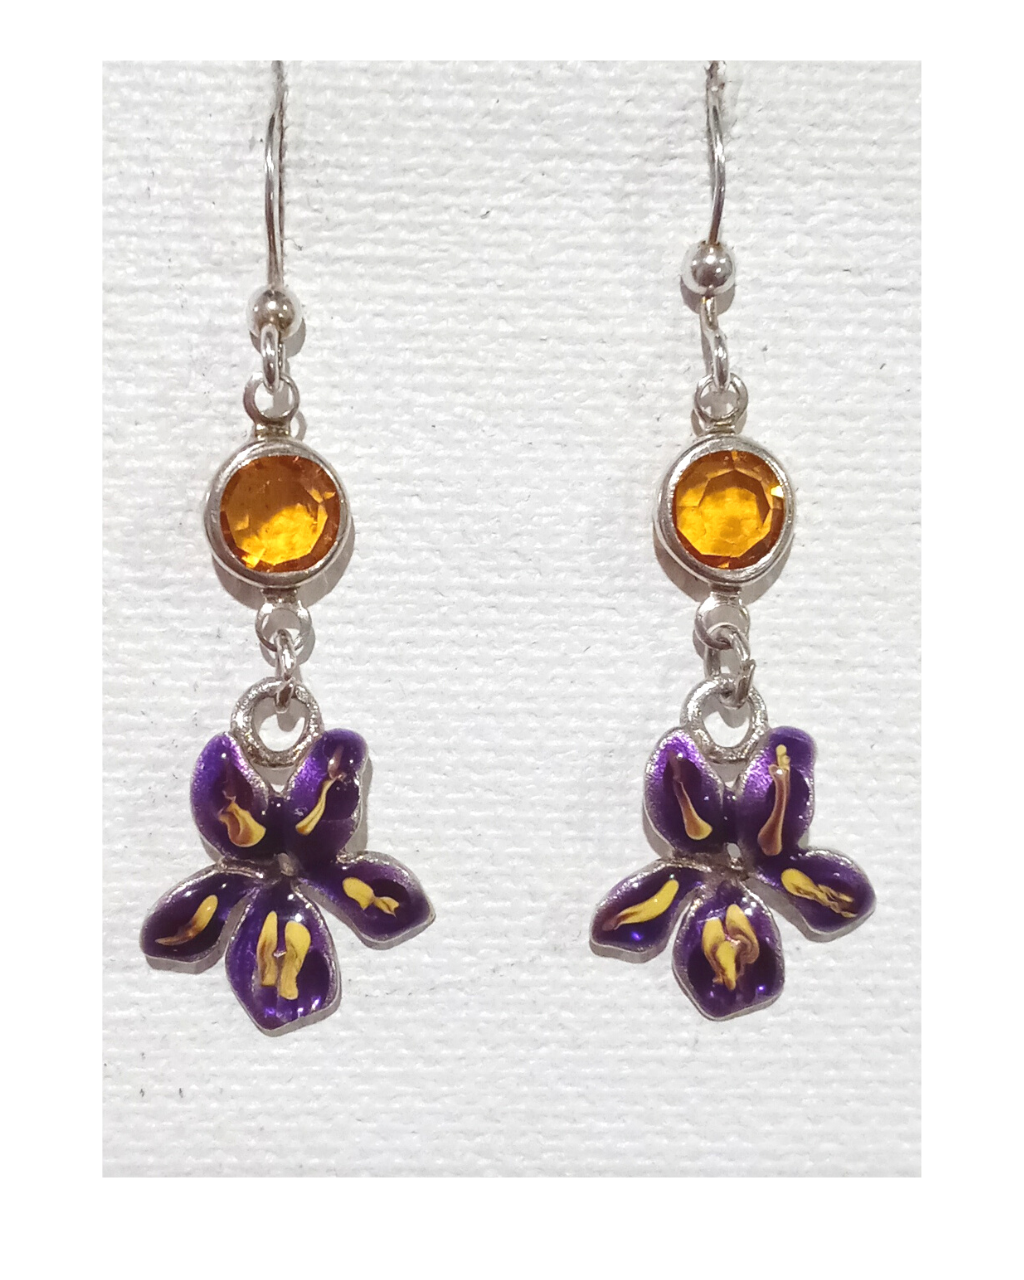 Sterling Gorgeous Exclusive Hand-enameled Purple Flower with Golden Tendrils with Gold Swarovski Crystal Earrings 1 3/4"L X 9/16"W